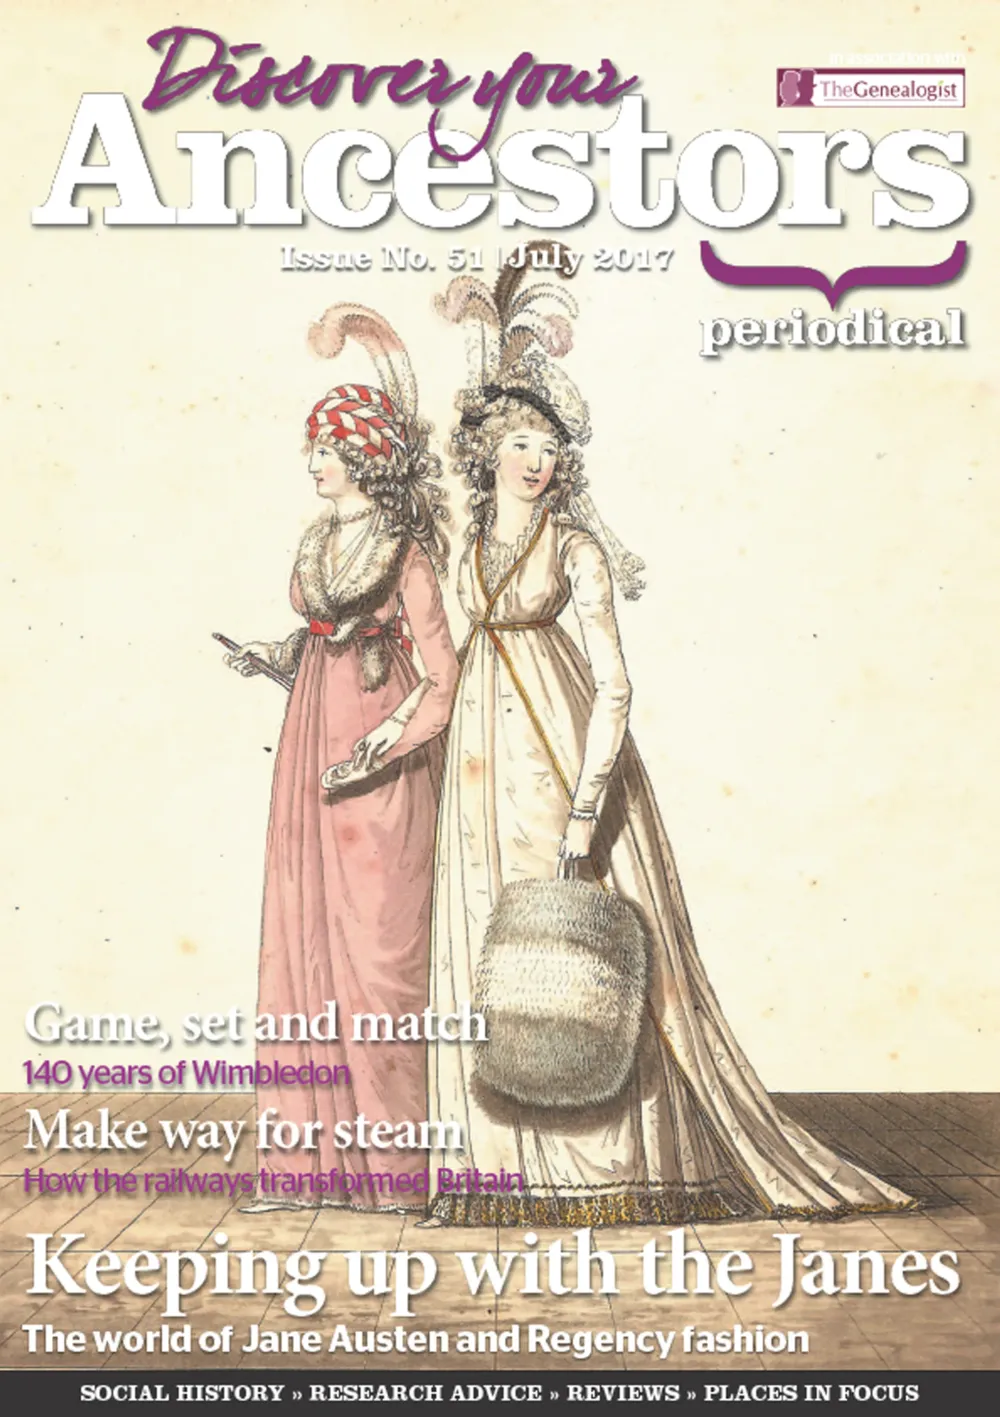 Discover Your Ancestors Periodical - July 2017